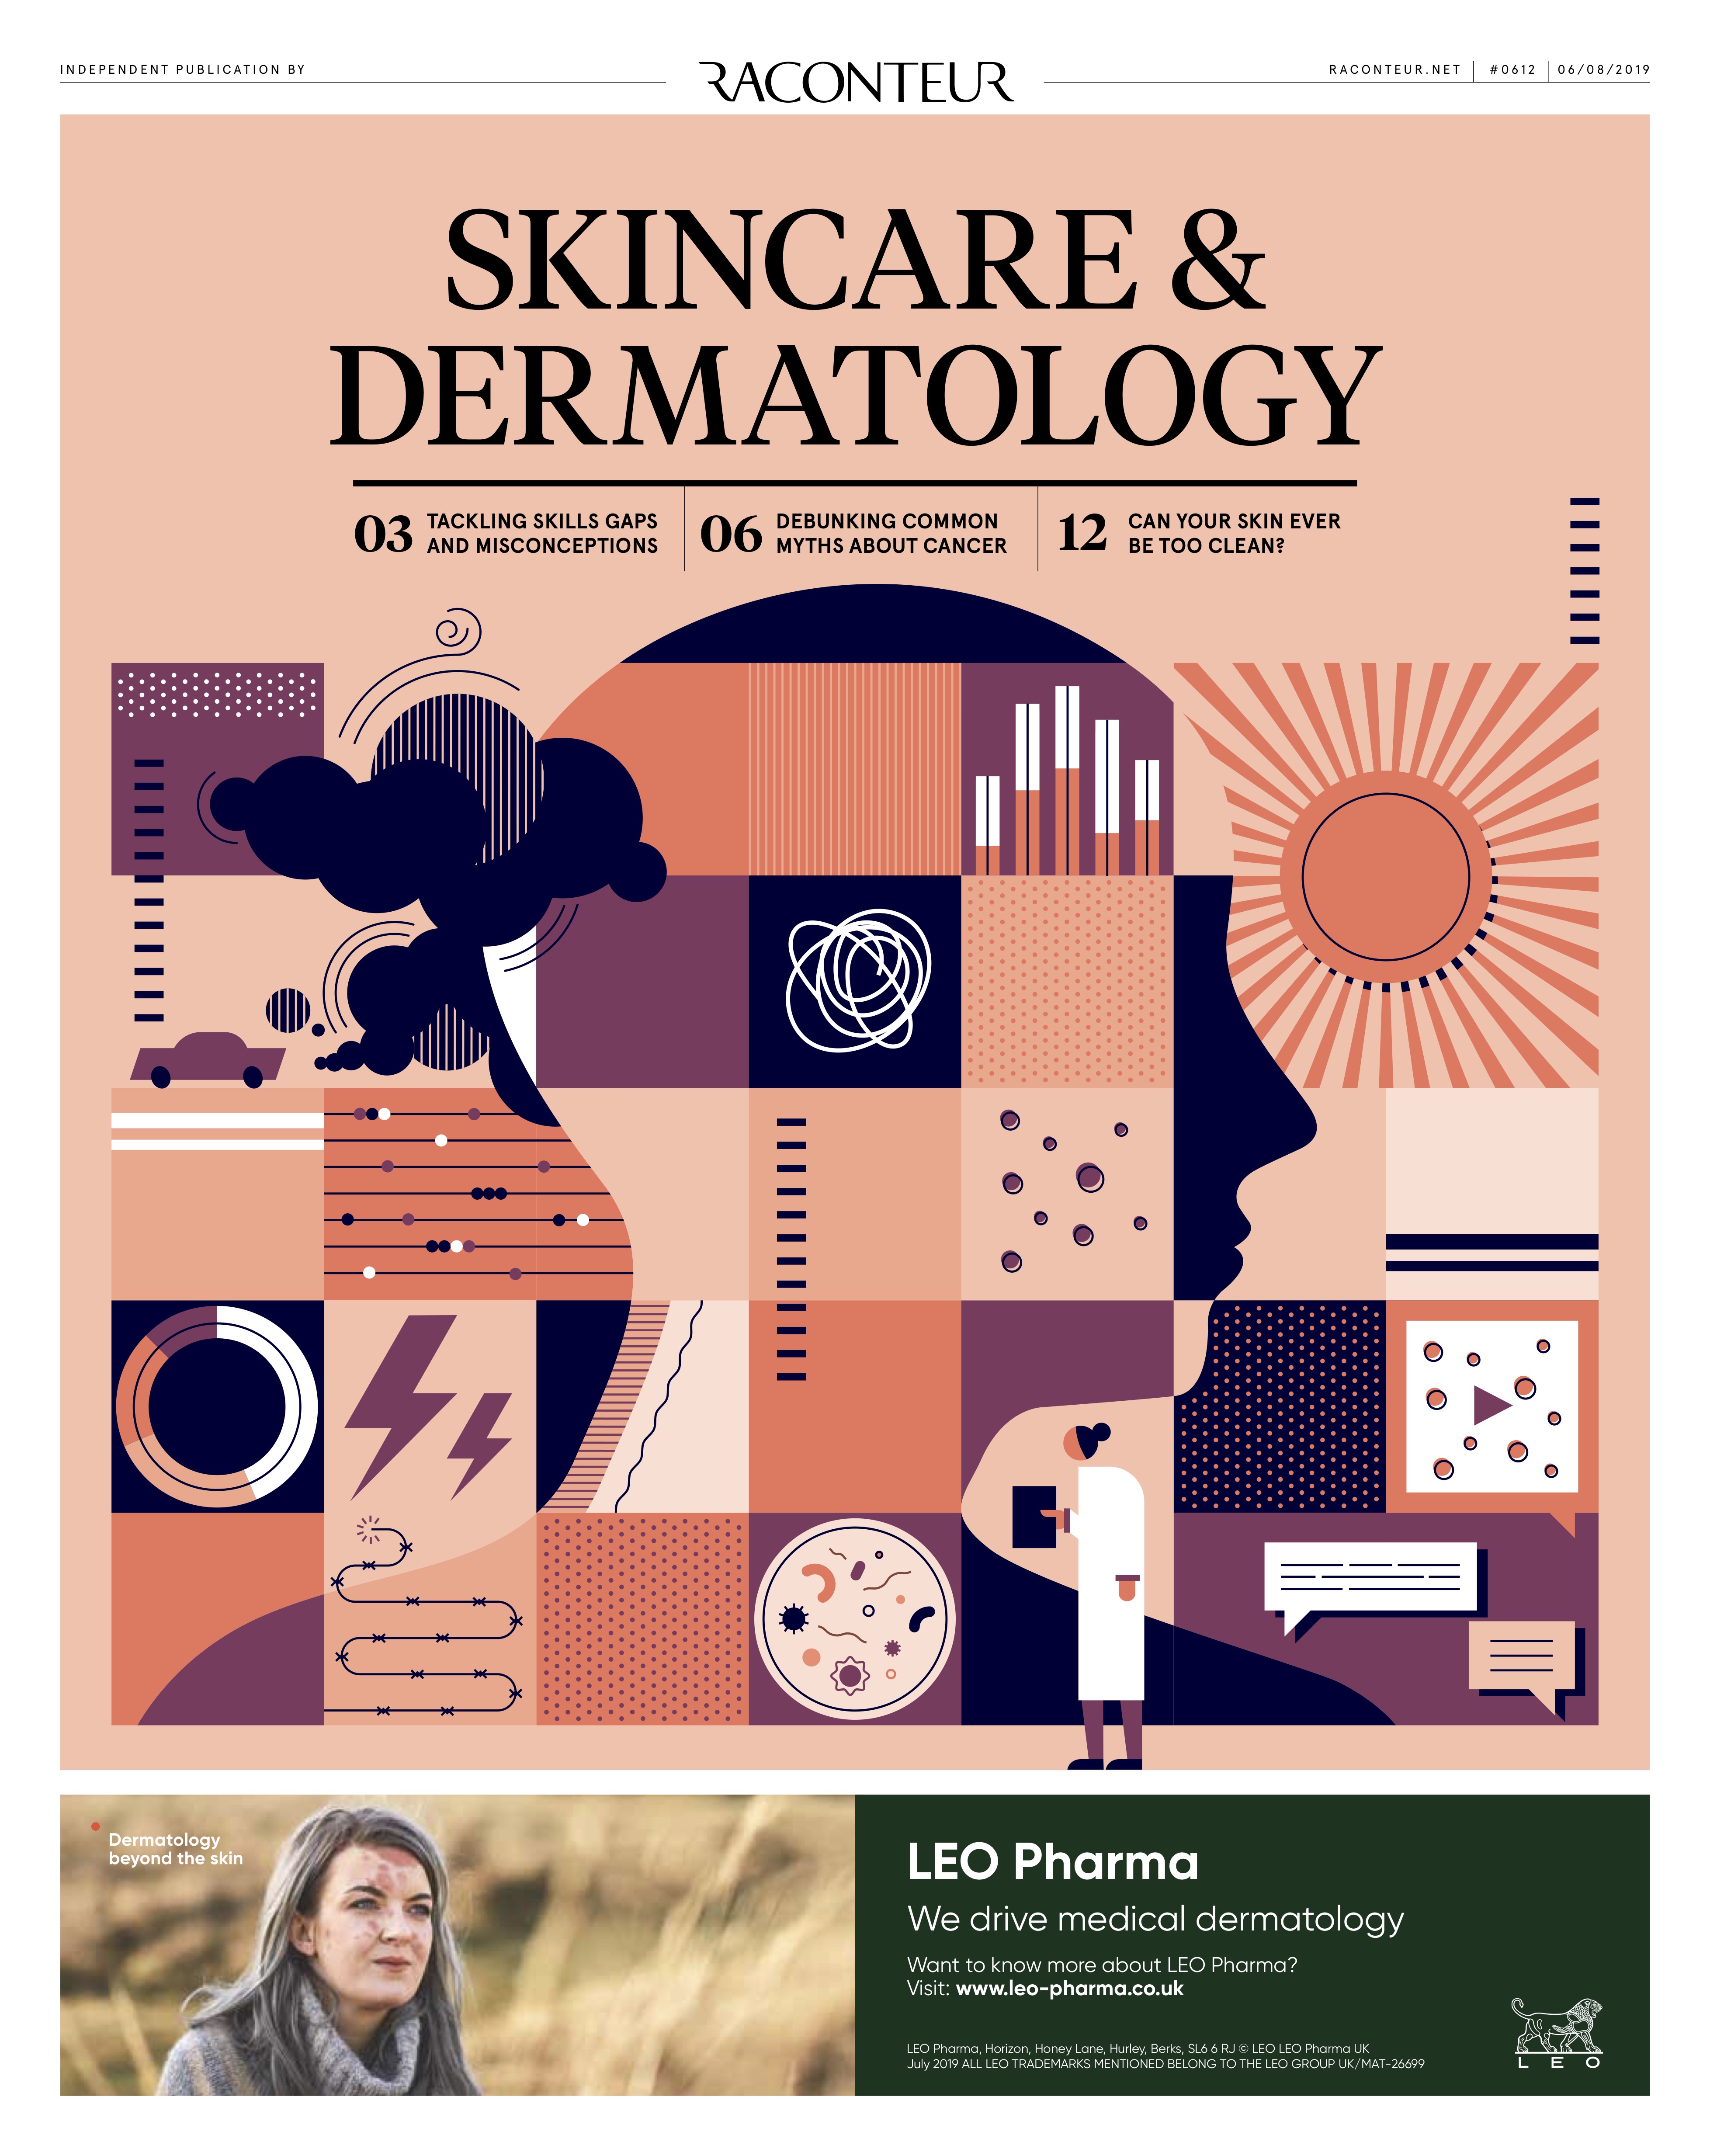 New Skincare & Dermatology Report - Consultant Connect